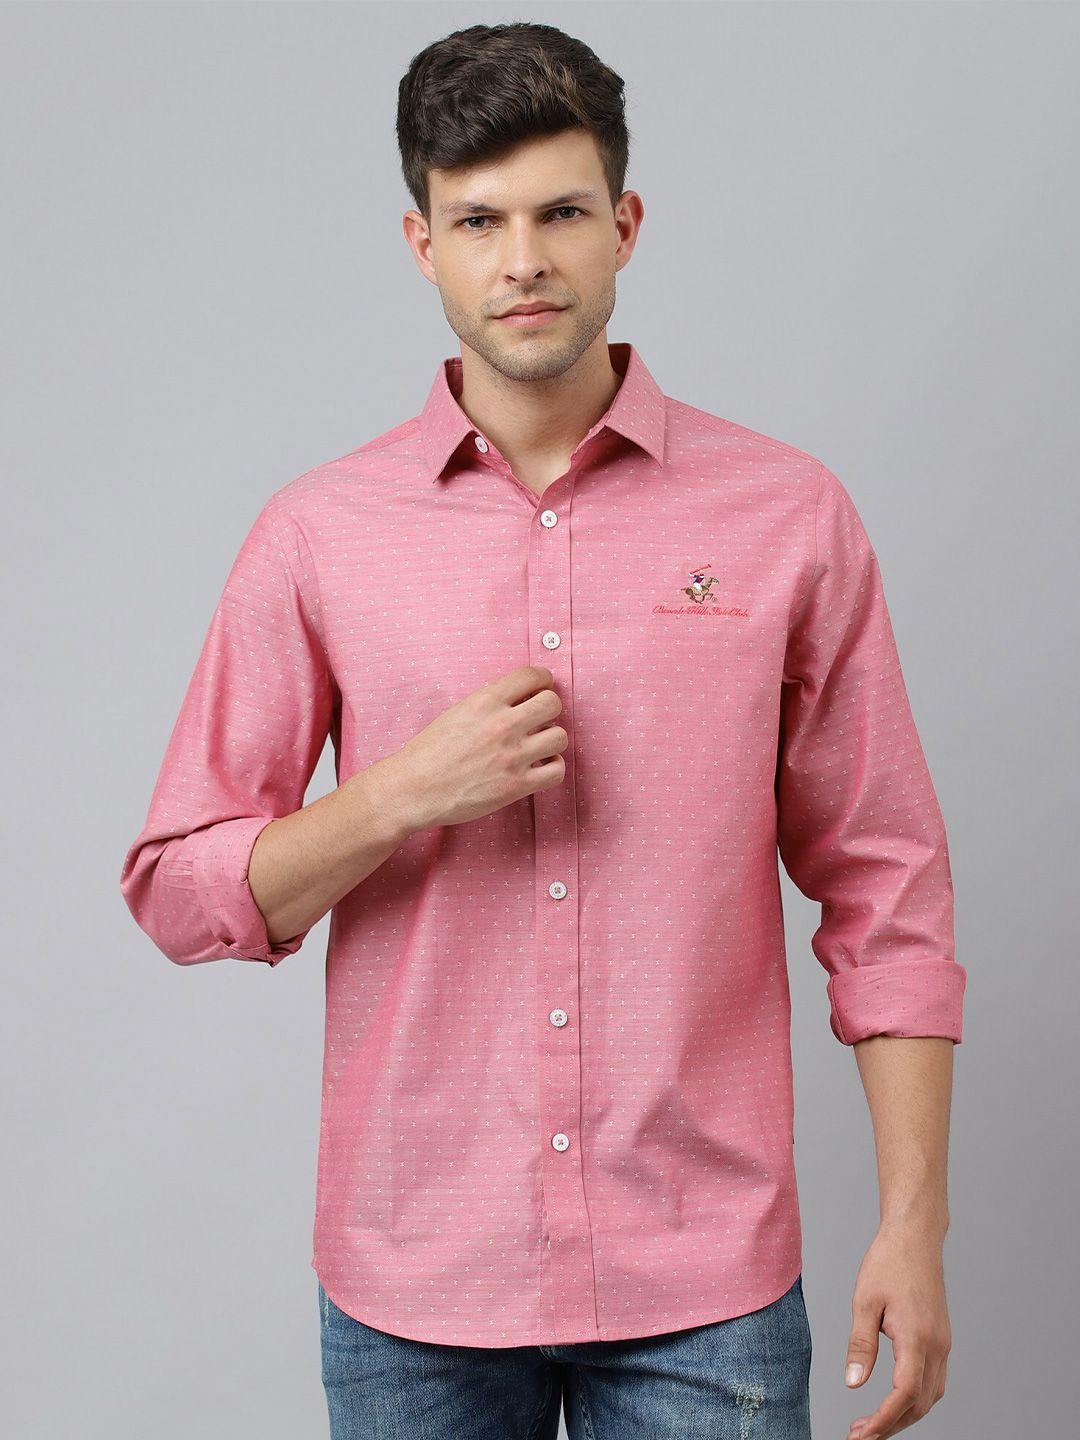 beverly hills polo club men printed cotton casual shirt